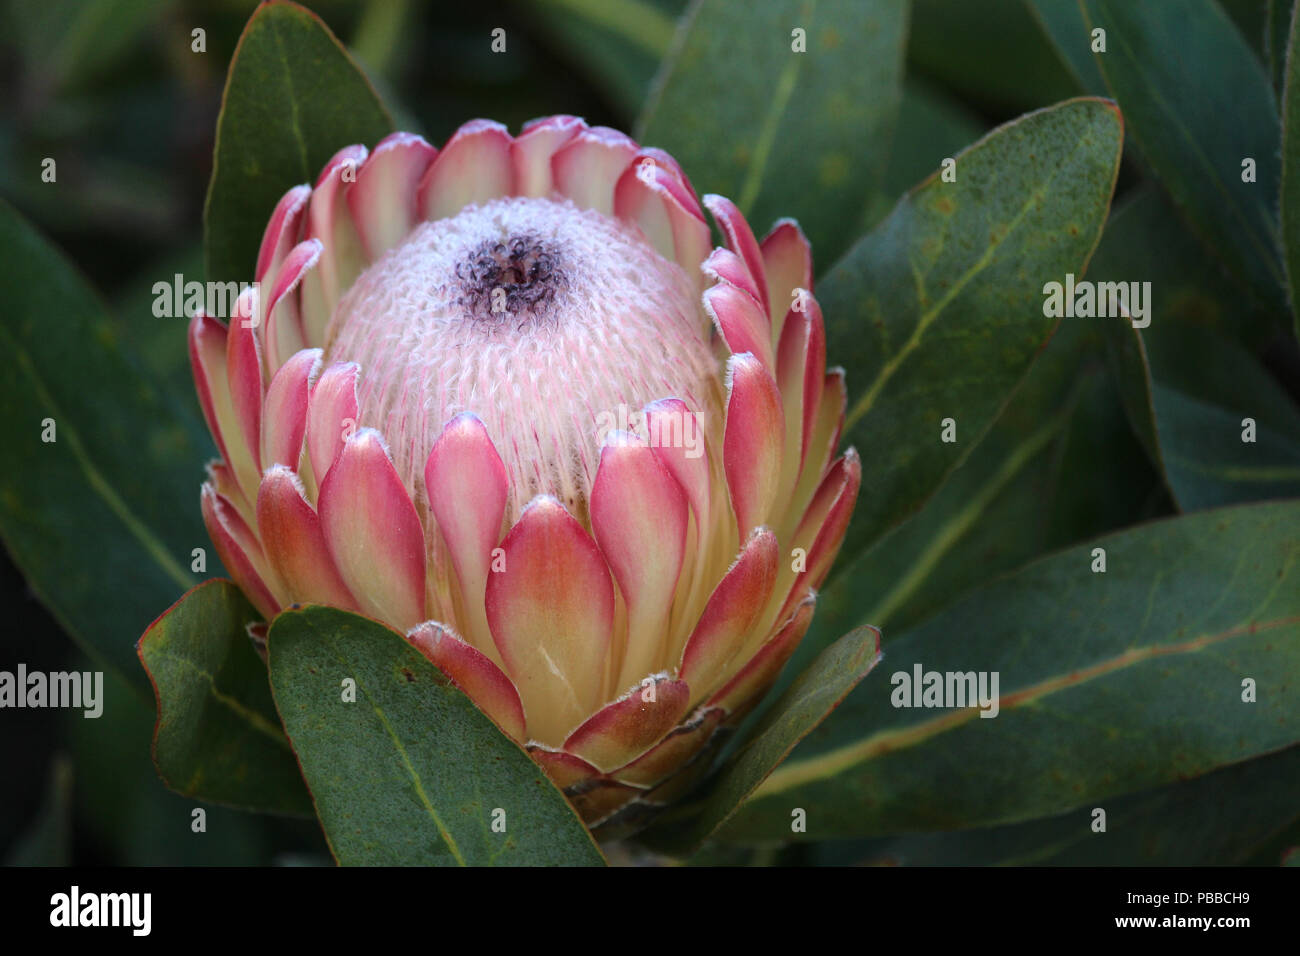 Close up of protea flower, flowering pink sugarbush plant Stock Photo